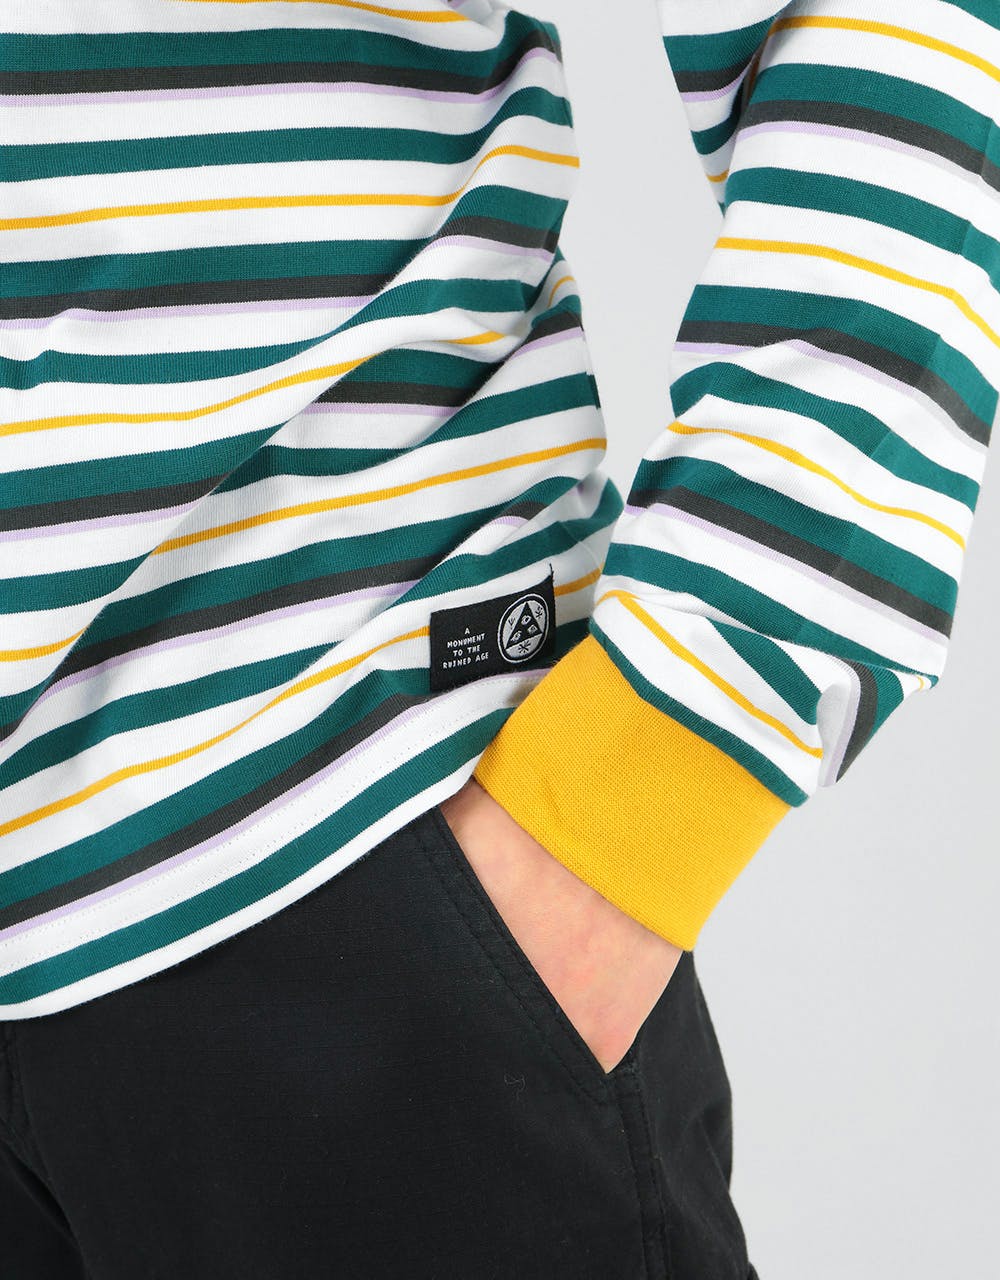 Welcome Surf Stripe Yarn-Dyed L/S Knit T-Shirt - Gold/Teal/White